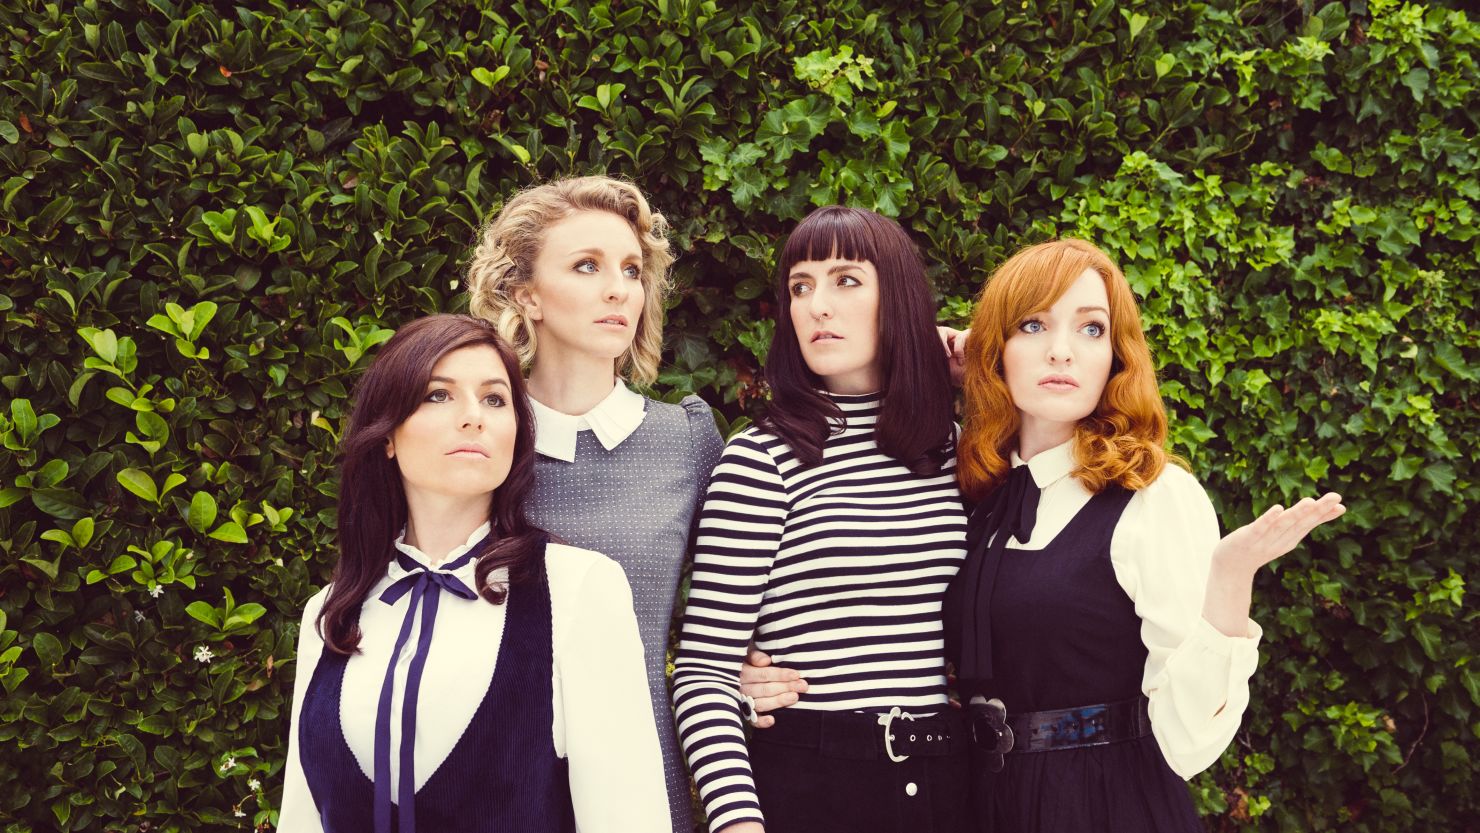 Members of Australian folk band "All Our Exes Live in Texas," from left to right: Georgia Mooney, Hannah Crofts, Katie Wighton and Elana Stone.